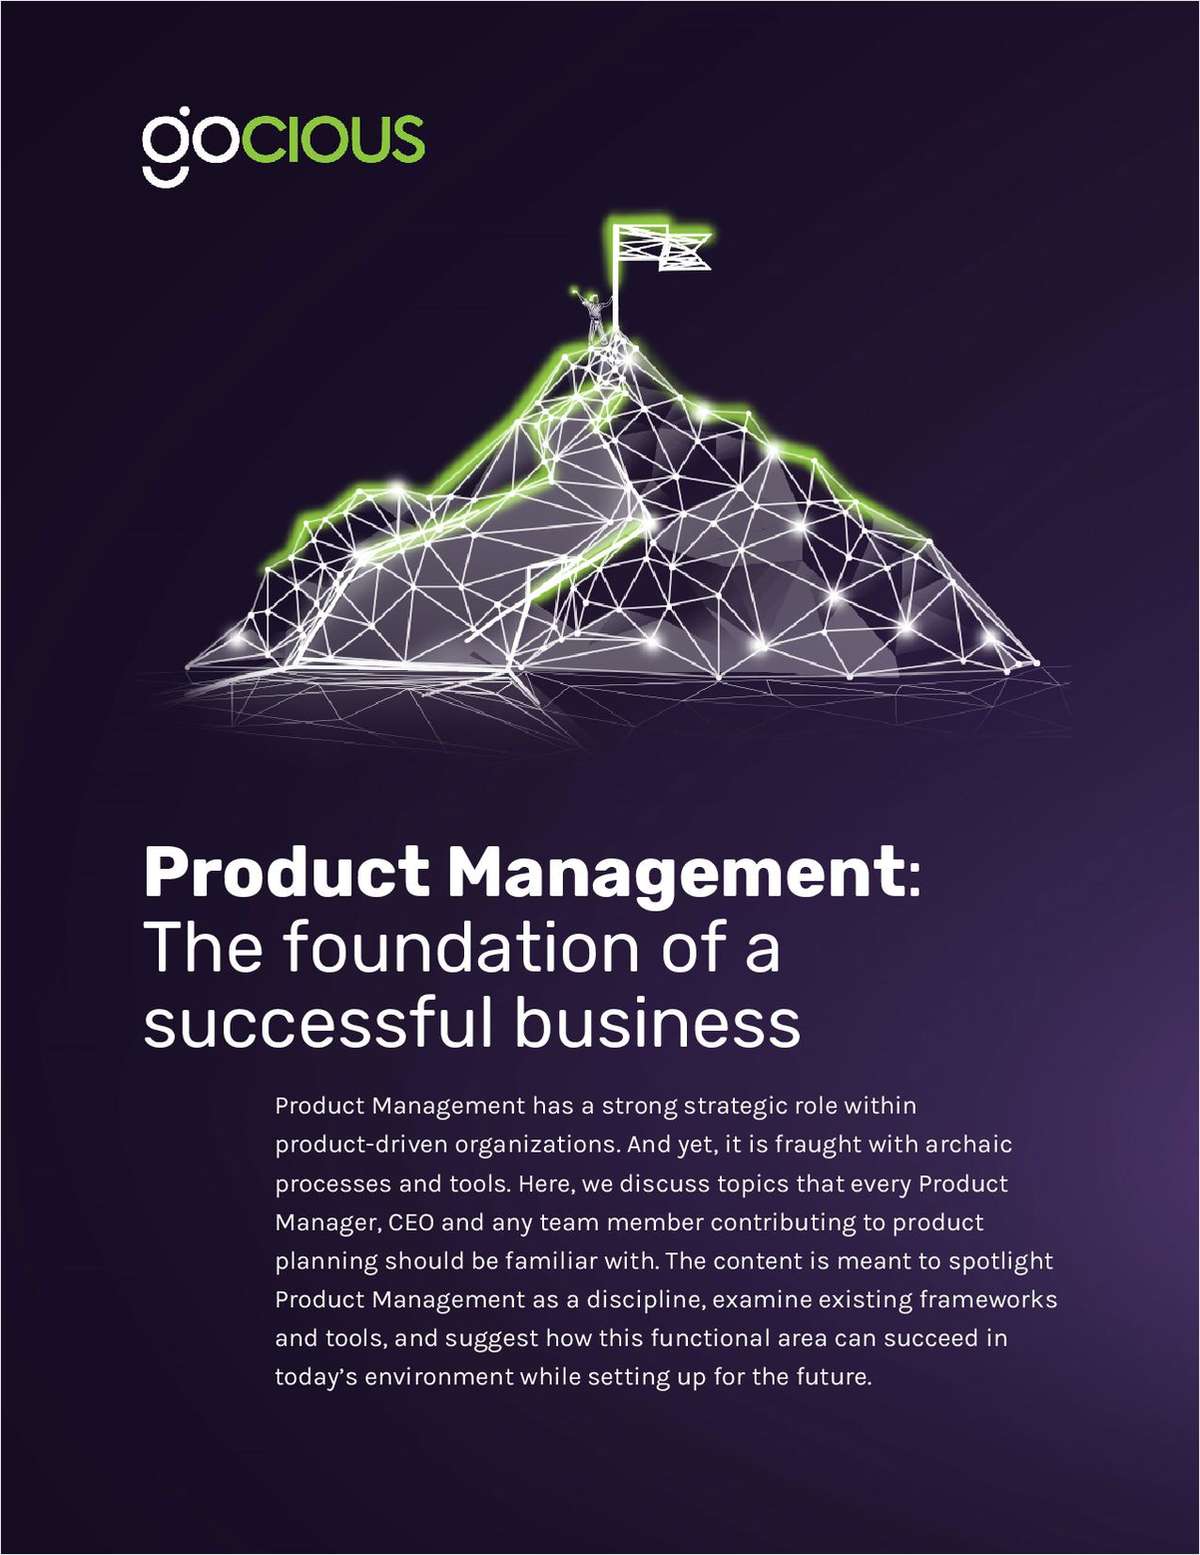 Product Management: The foundation of a successful business